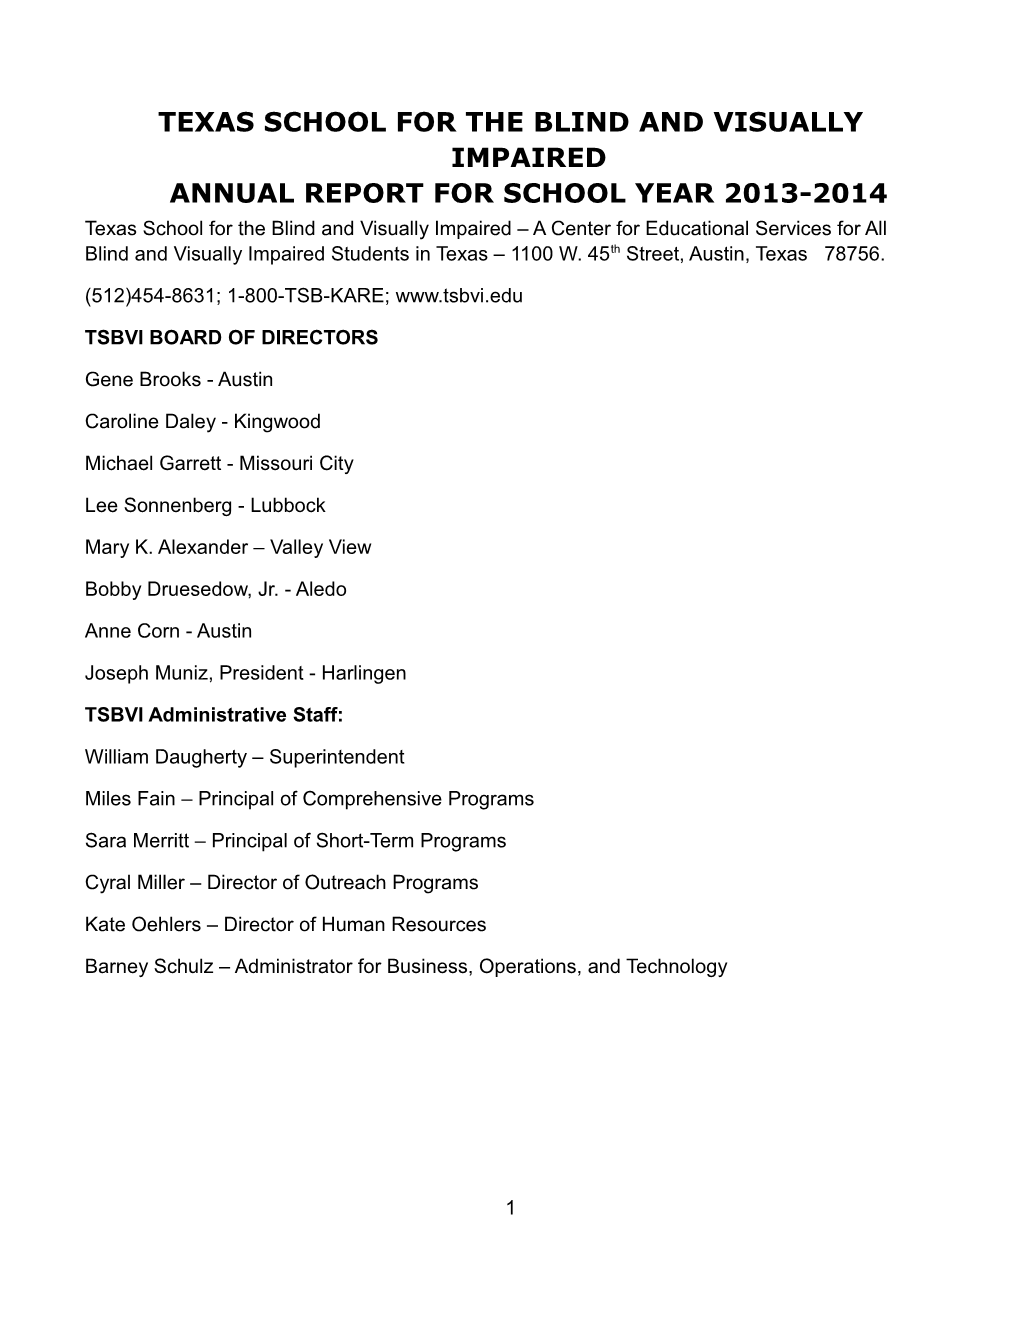 Texas School for the Blind and Visually Impairedannual Report for School Year 2013-2014